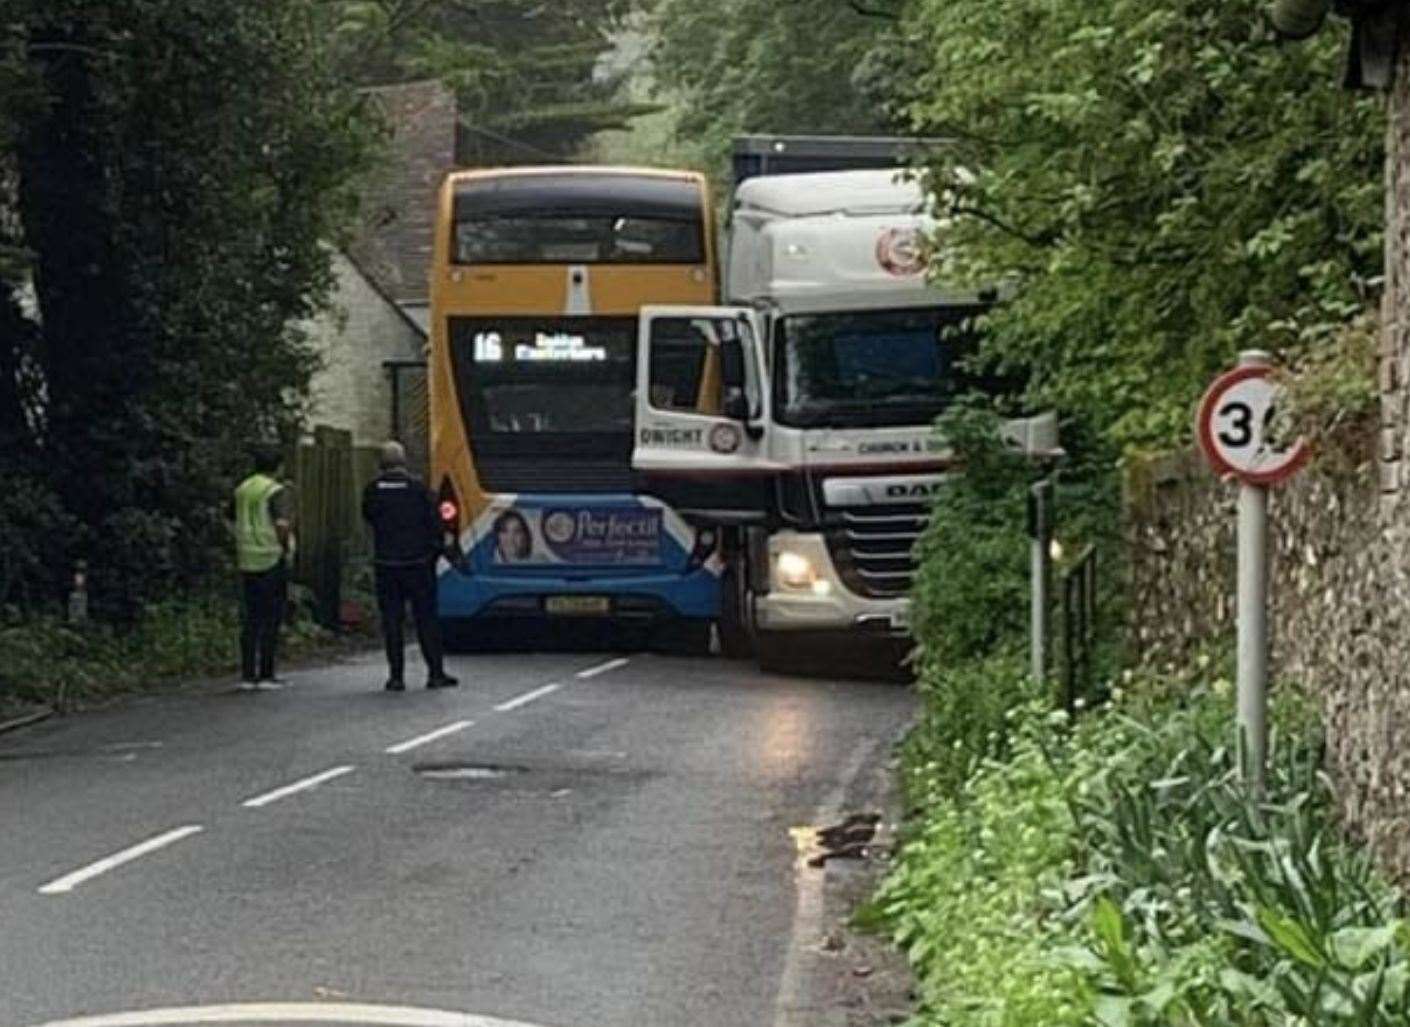 A bus and a lorry got wedged as they tried to pass each other on a narrow stretch of the A260 Canterbury Road